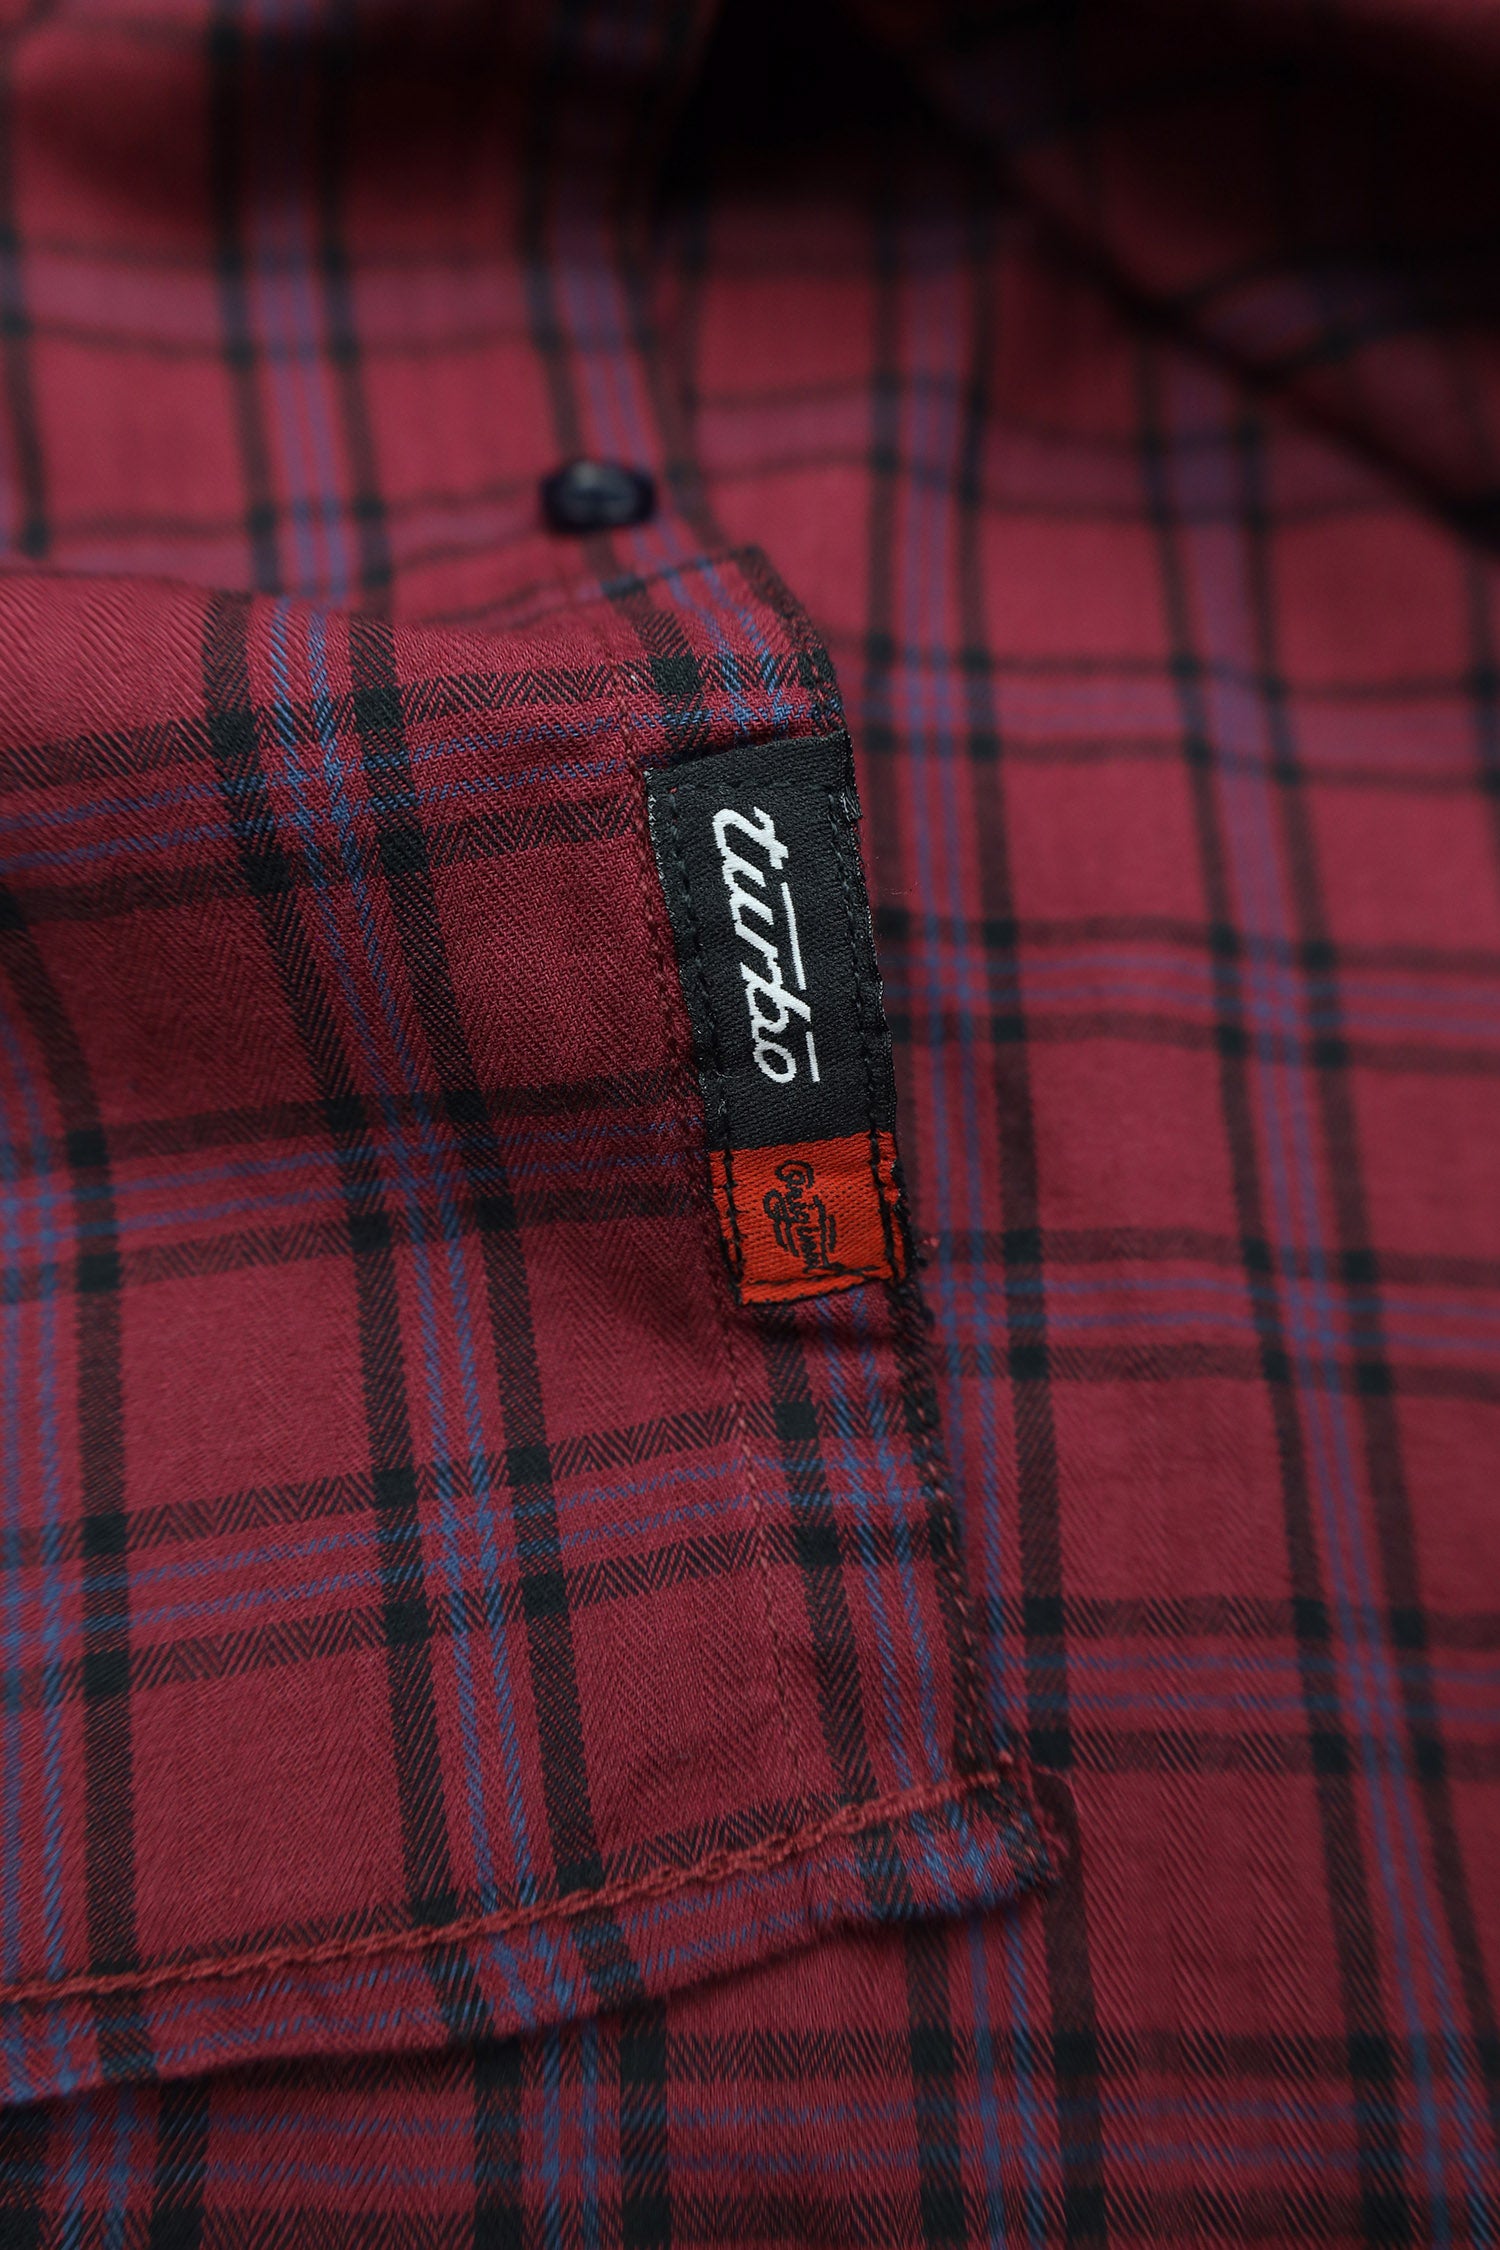 Double Lining Checked Full Sleeve Casual Shirt